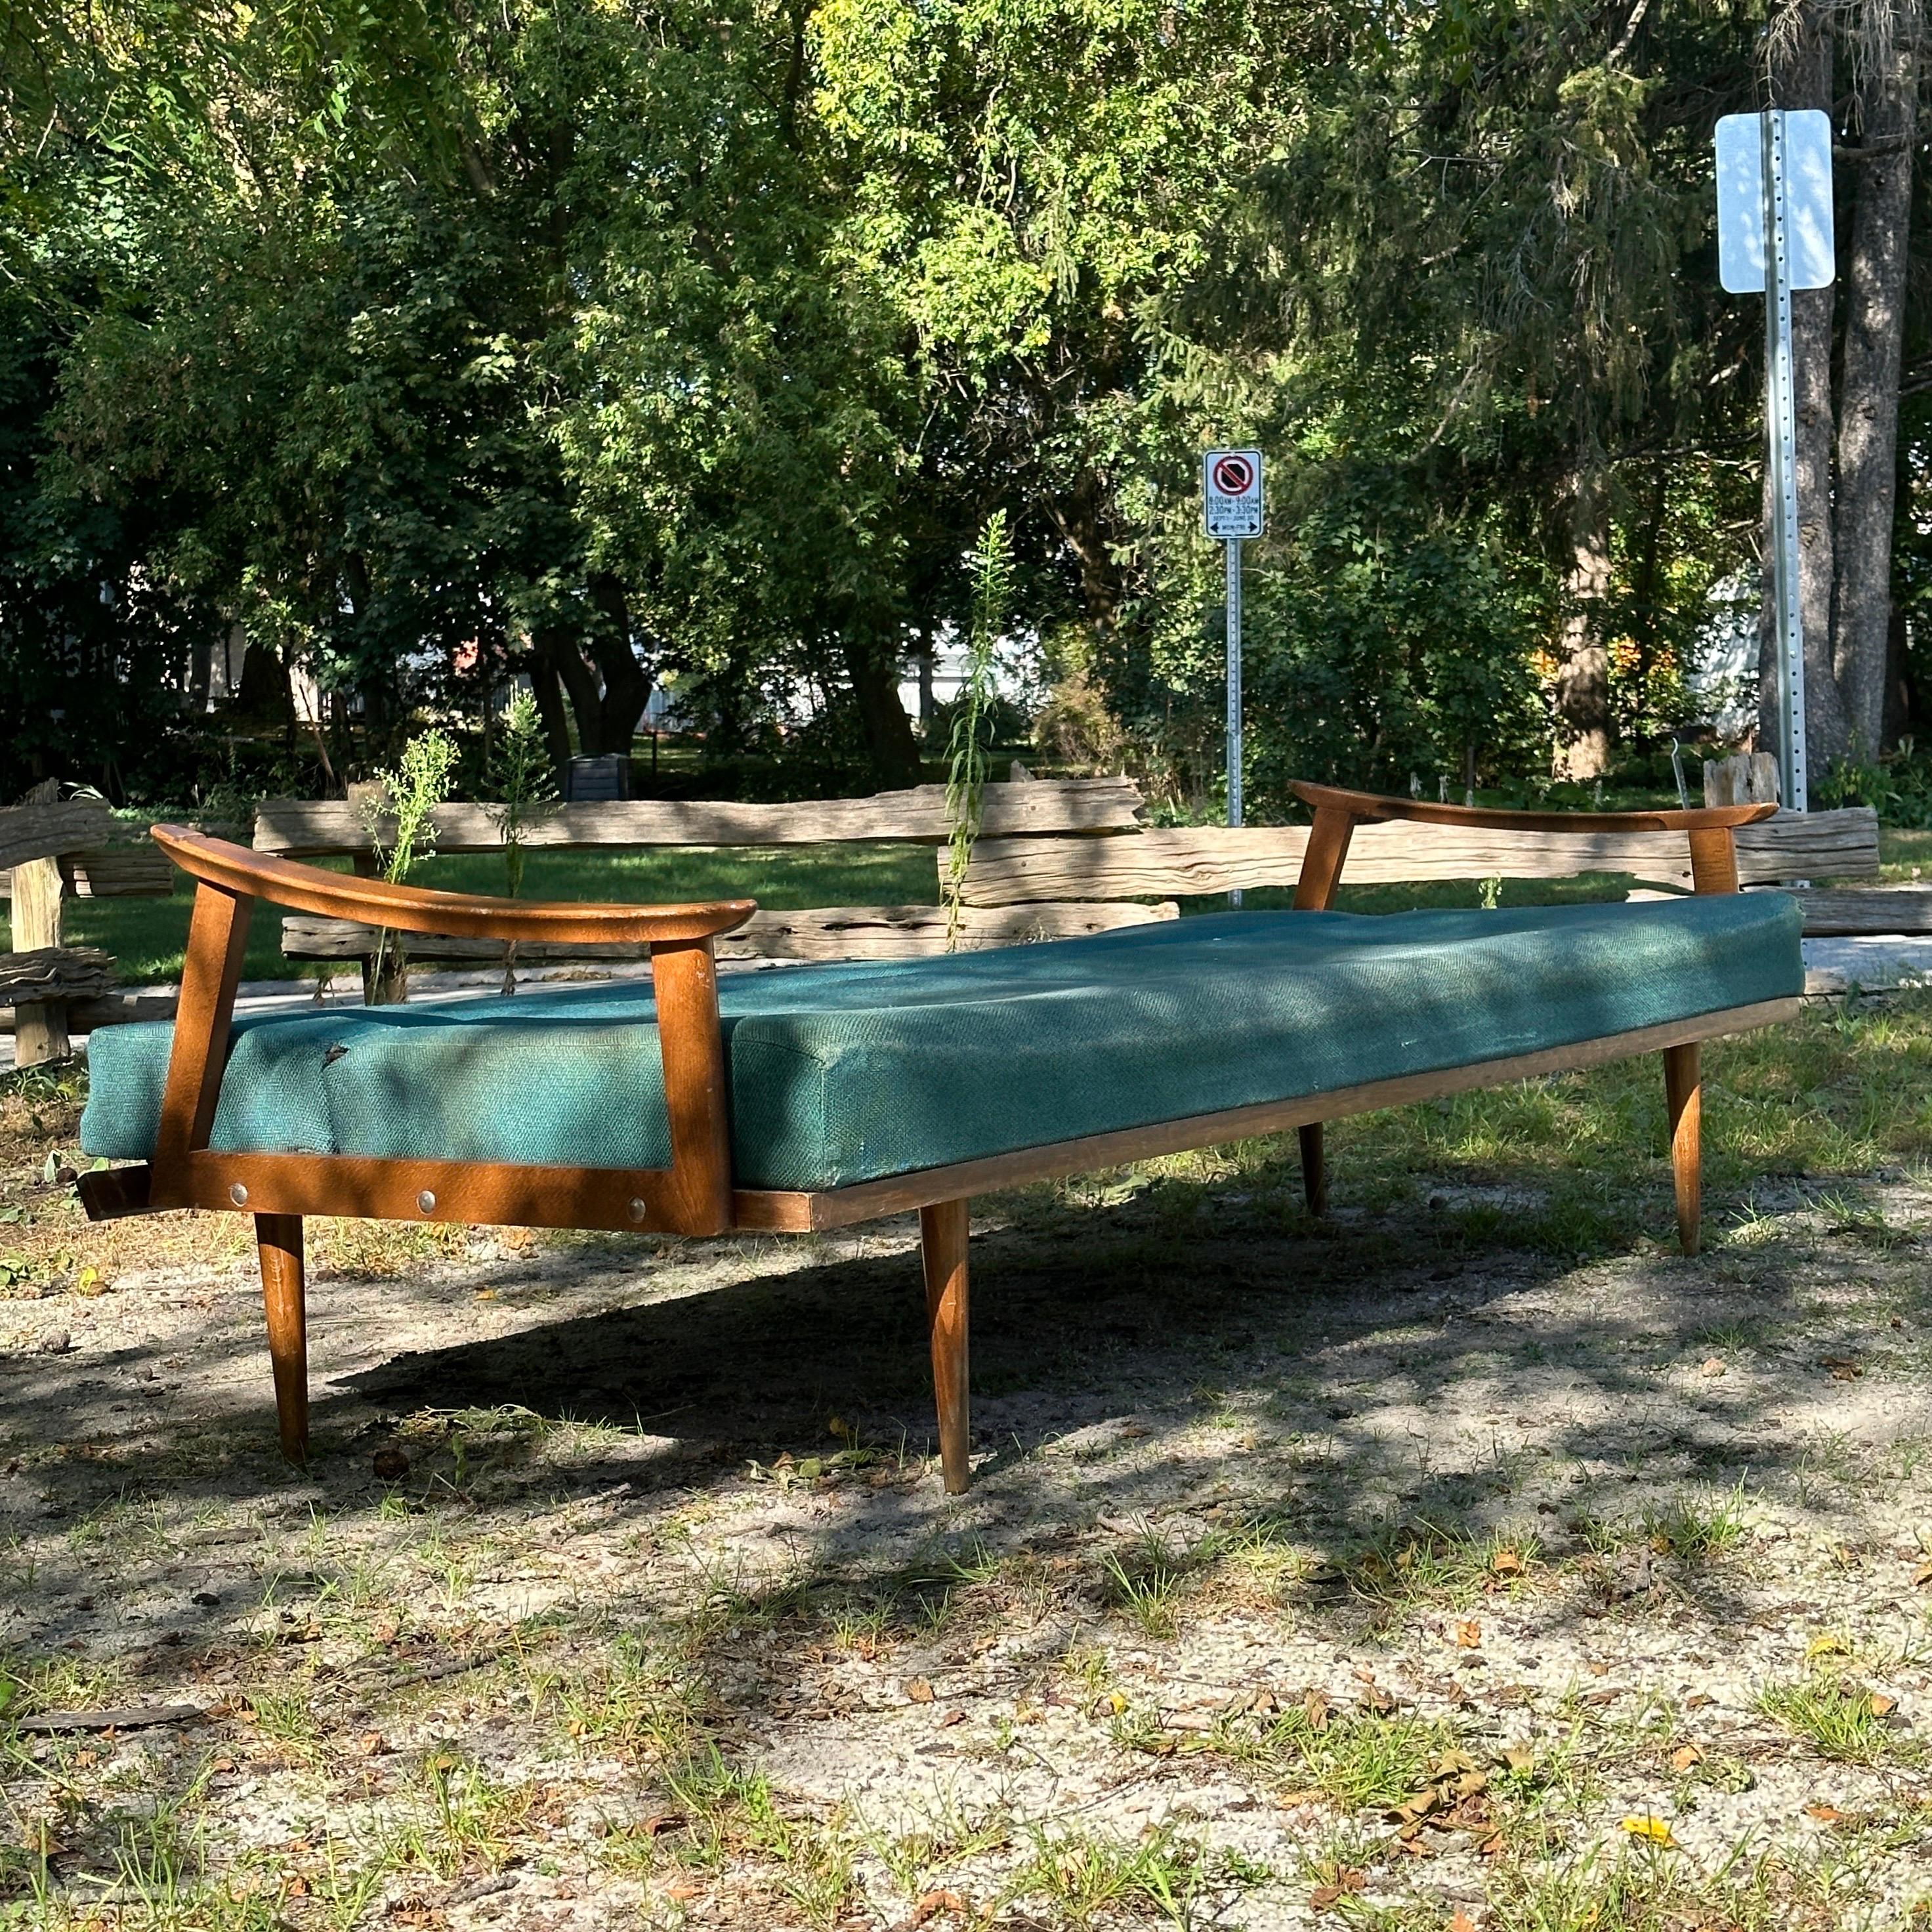 Condition: Fair Vintage Condition

Dimensions: 79” L x 28” D (35” D Bed) x 28” H (15.5” SH)

Description: A vintage elm sofa bed, made in Denmark, circa 1950s. Still usable. Frame is structurally sound. Easily converts to bed with one hand. Can be